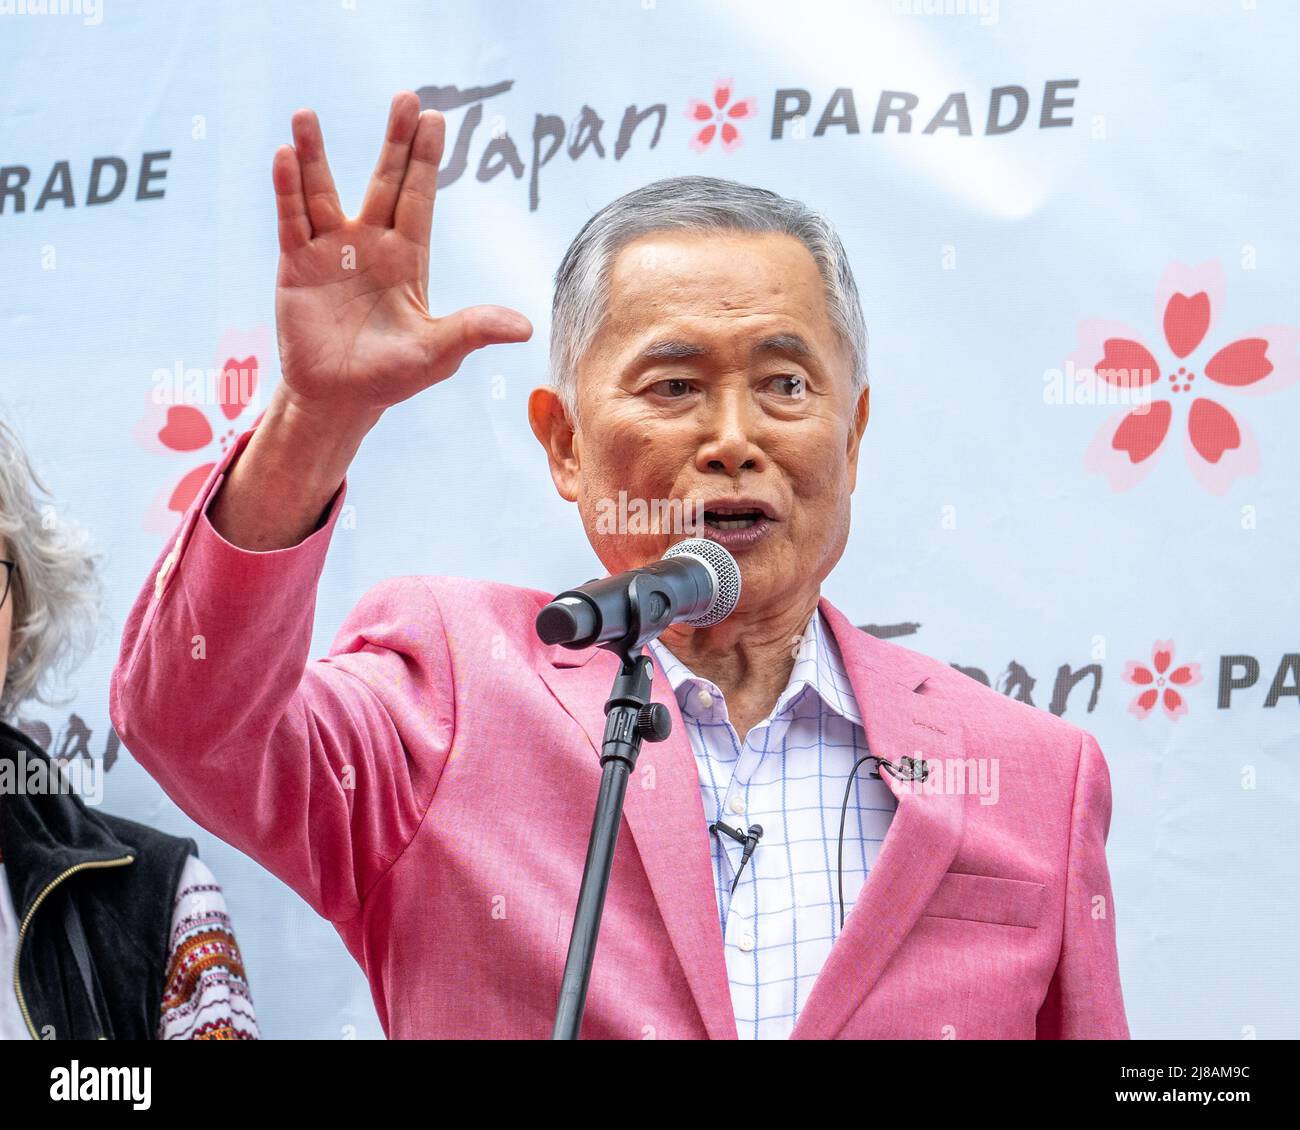 New York, USA. 14th May, 2022. Actor, social justice activist and inaugural Grand Marshall George Takei wishes everybody 'Live Long and Prosper' before participating in New York City's first Japan Day Parade. Credit: Enrique Shore/Alamy Live News Stock Photo